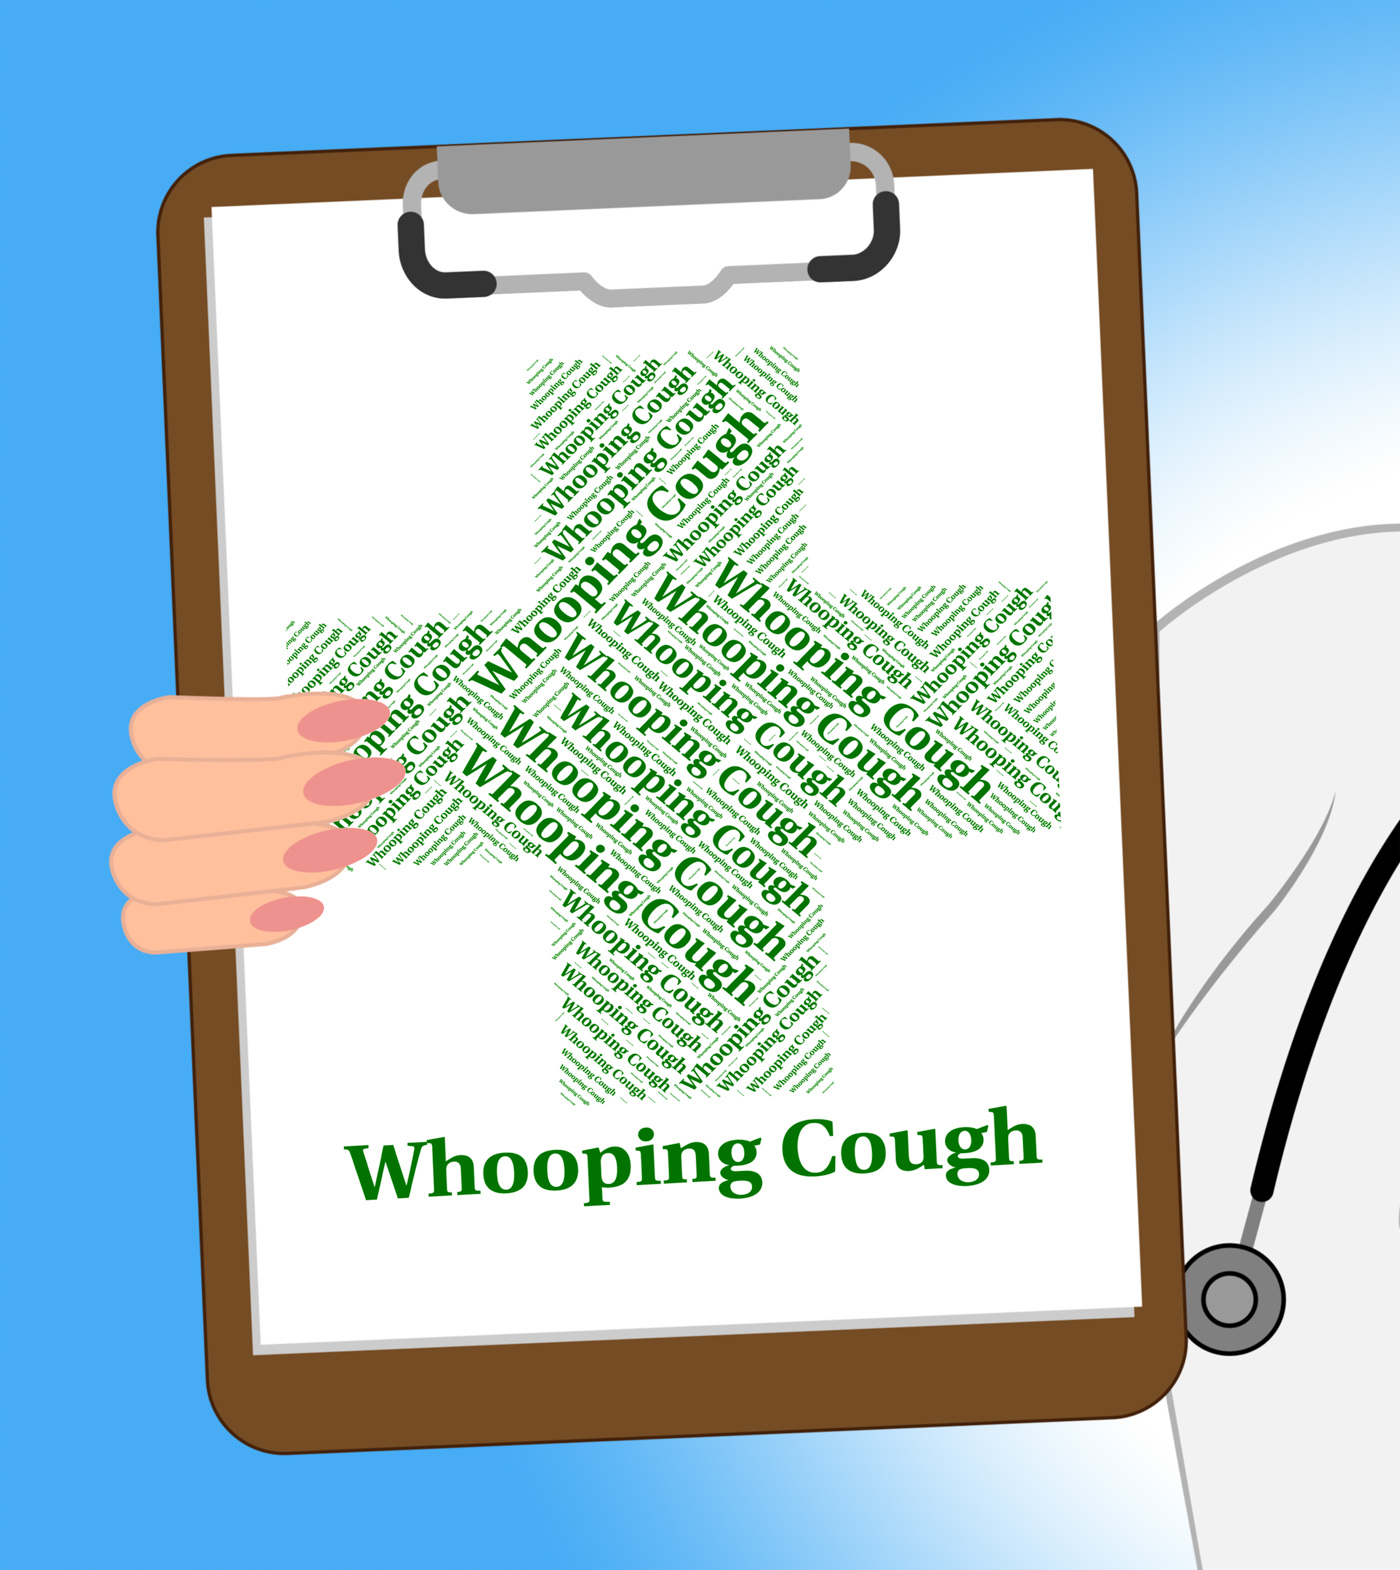 Whooping cough shows poor health and pertussis photo